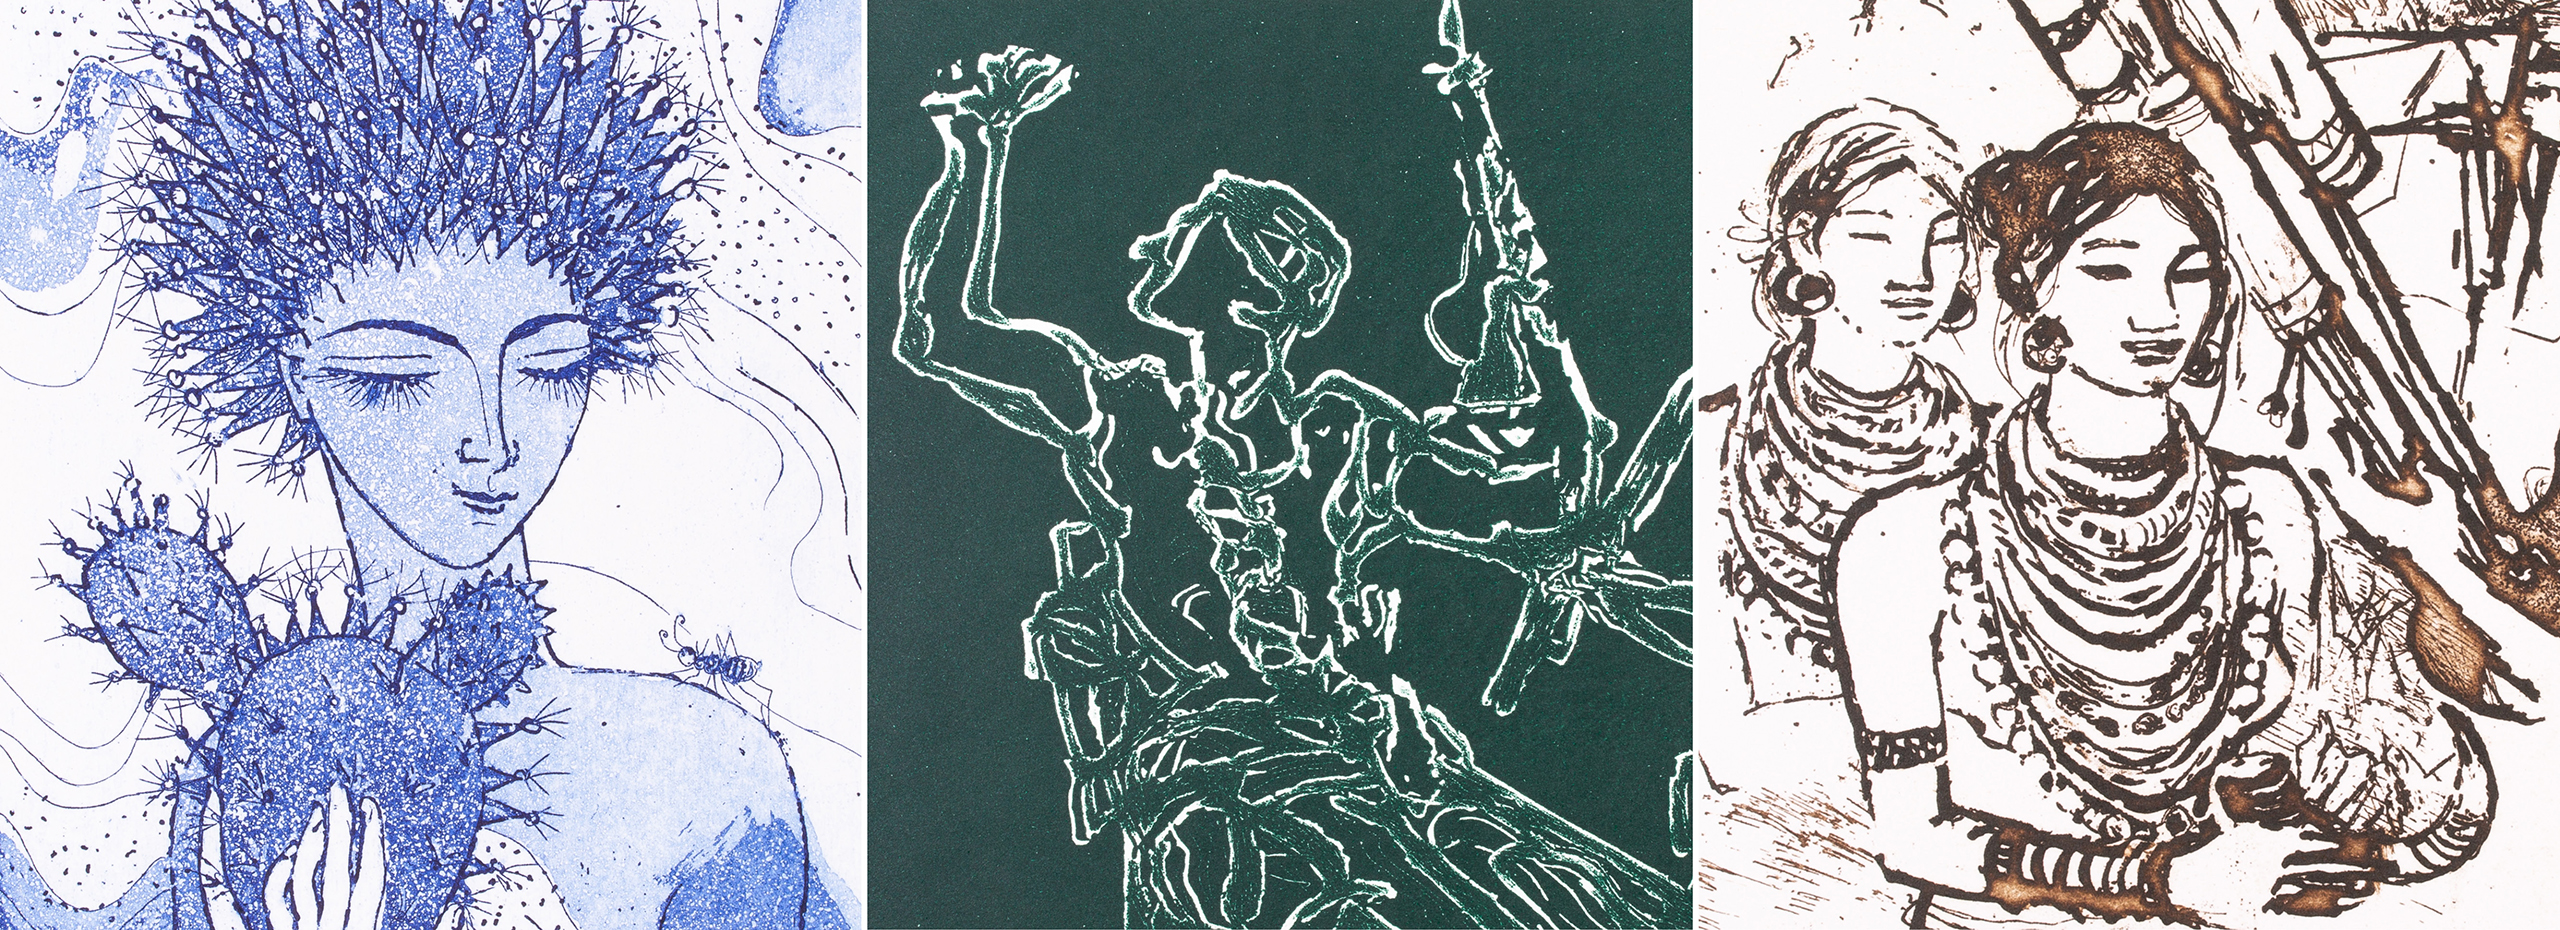 A blue and white etching of a female figure holding a prickly plant, a green and white etching of a figure holding a sword, and a brown and white etching of women holding musical instruments